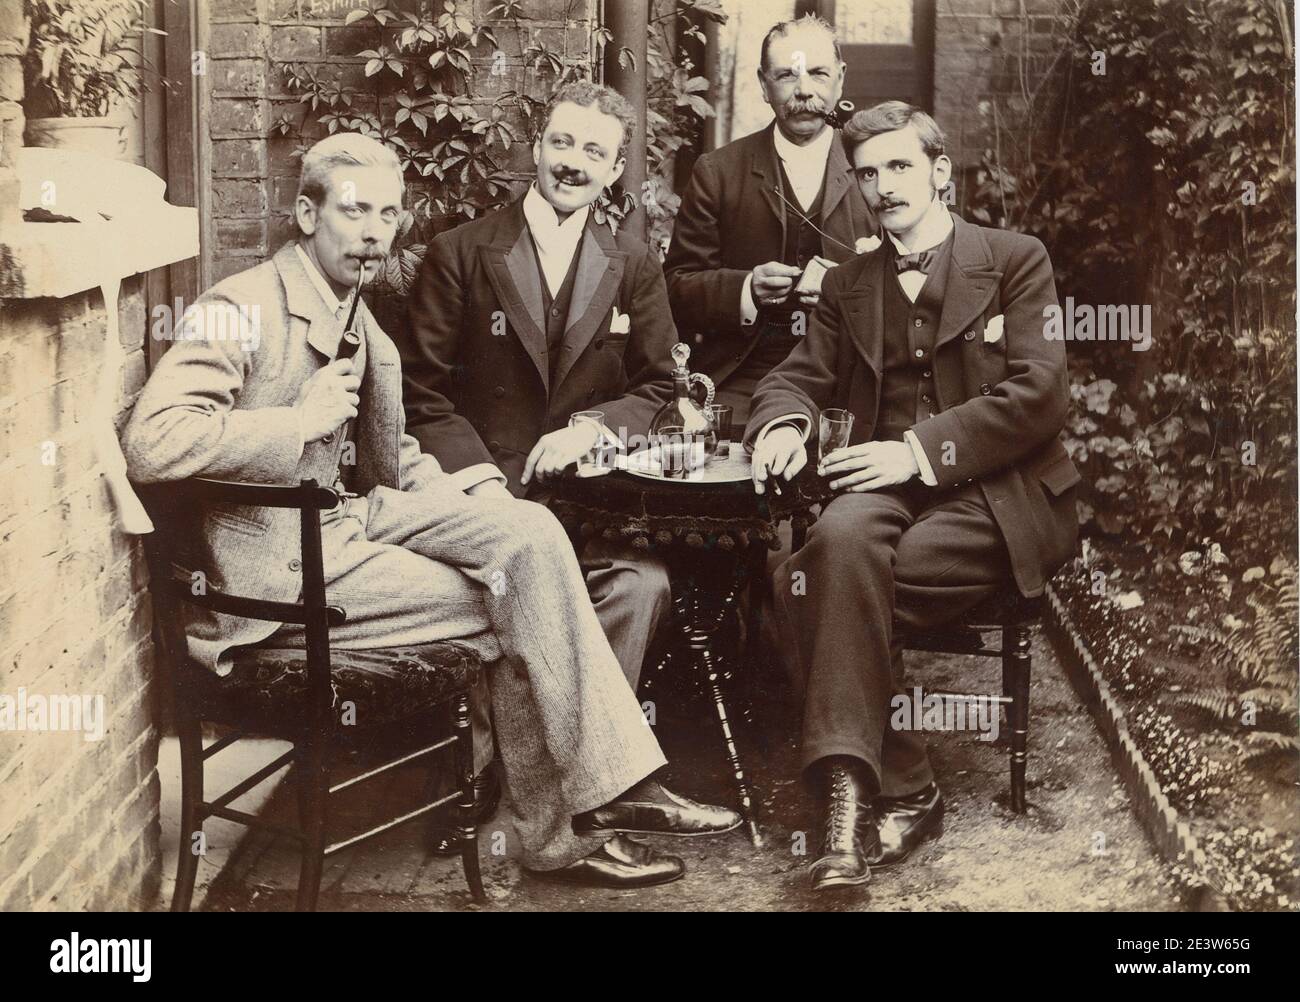 1890s Victorian portrait of an unknown fashionably dressed older man seated in a garden. One of a sequence of ten photographs of friends and family in the same setting. Stock Photo